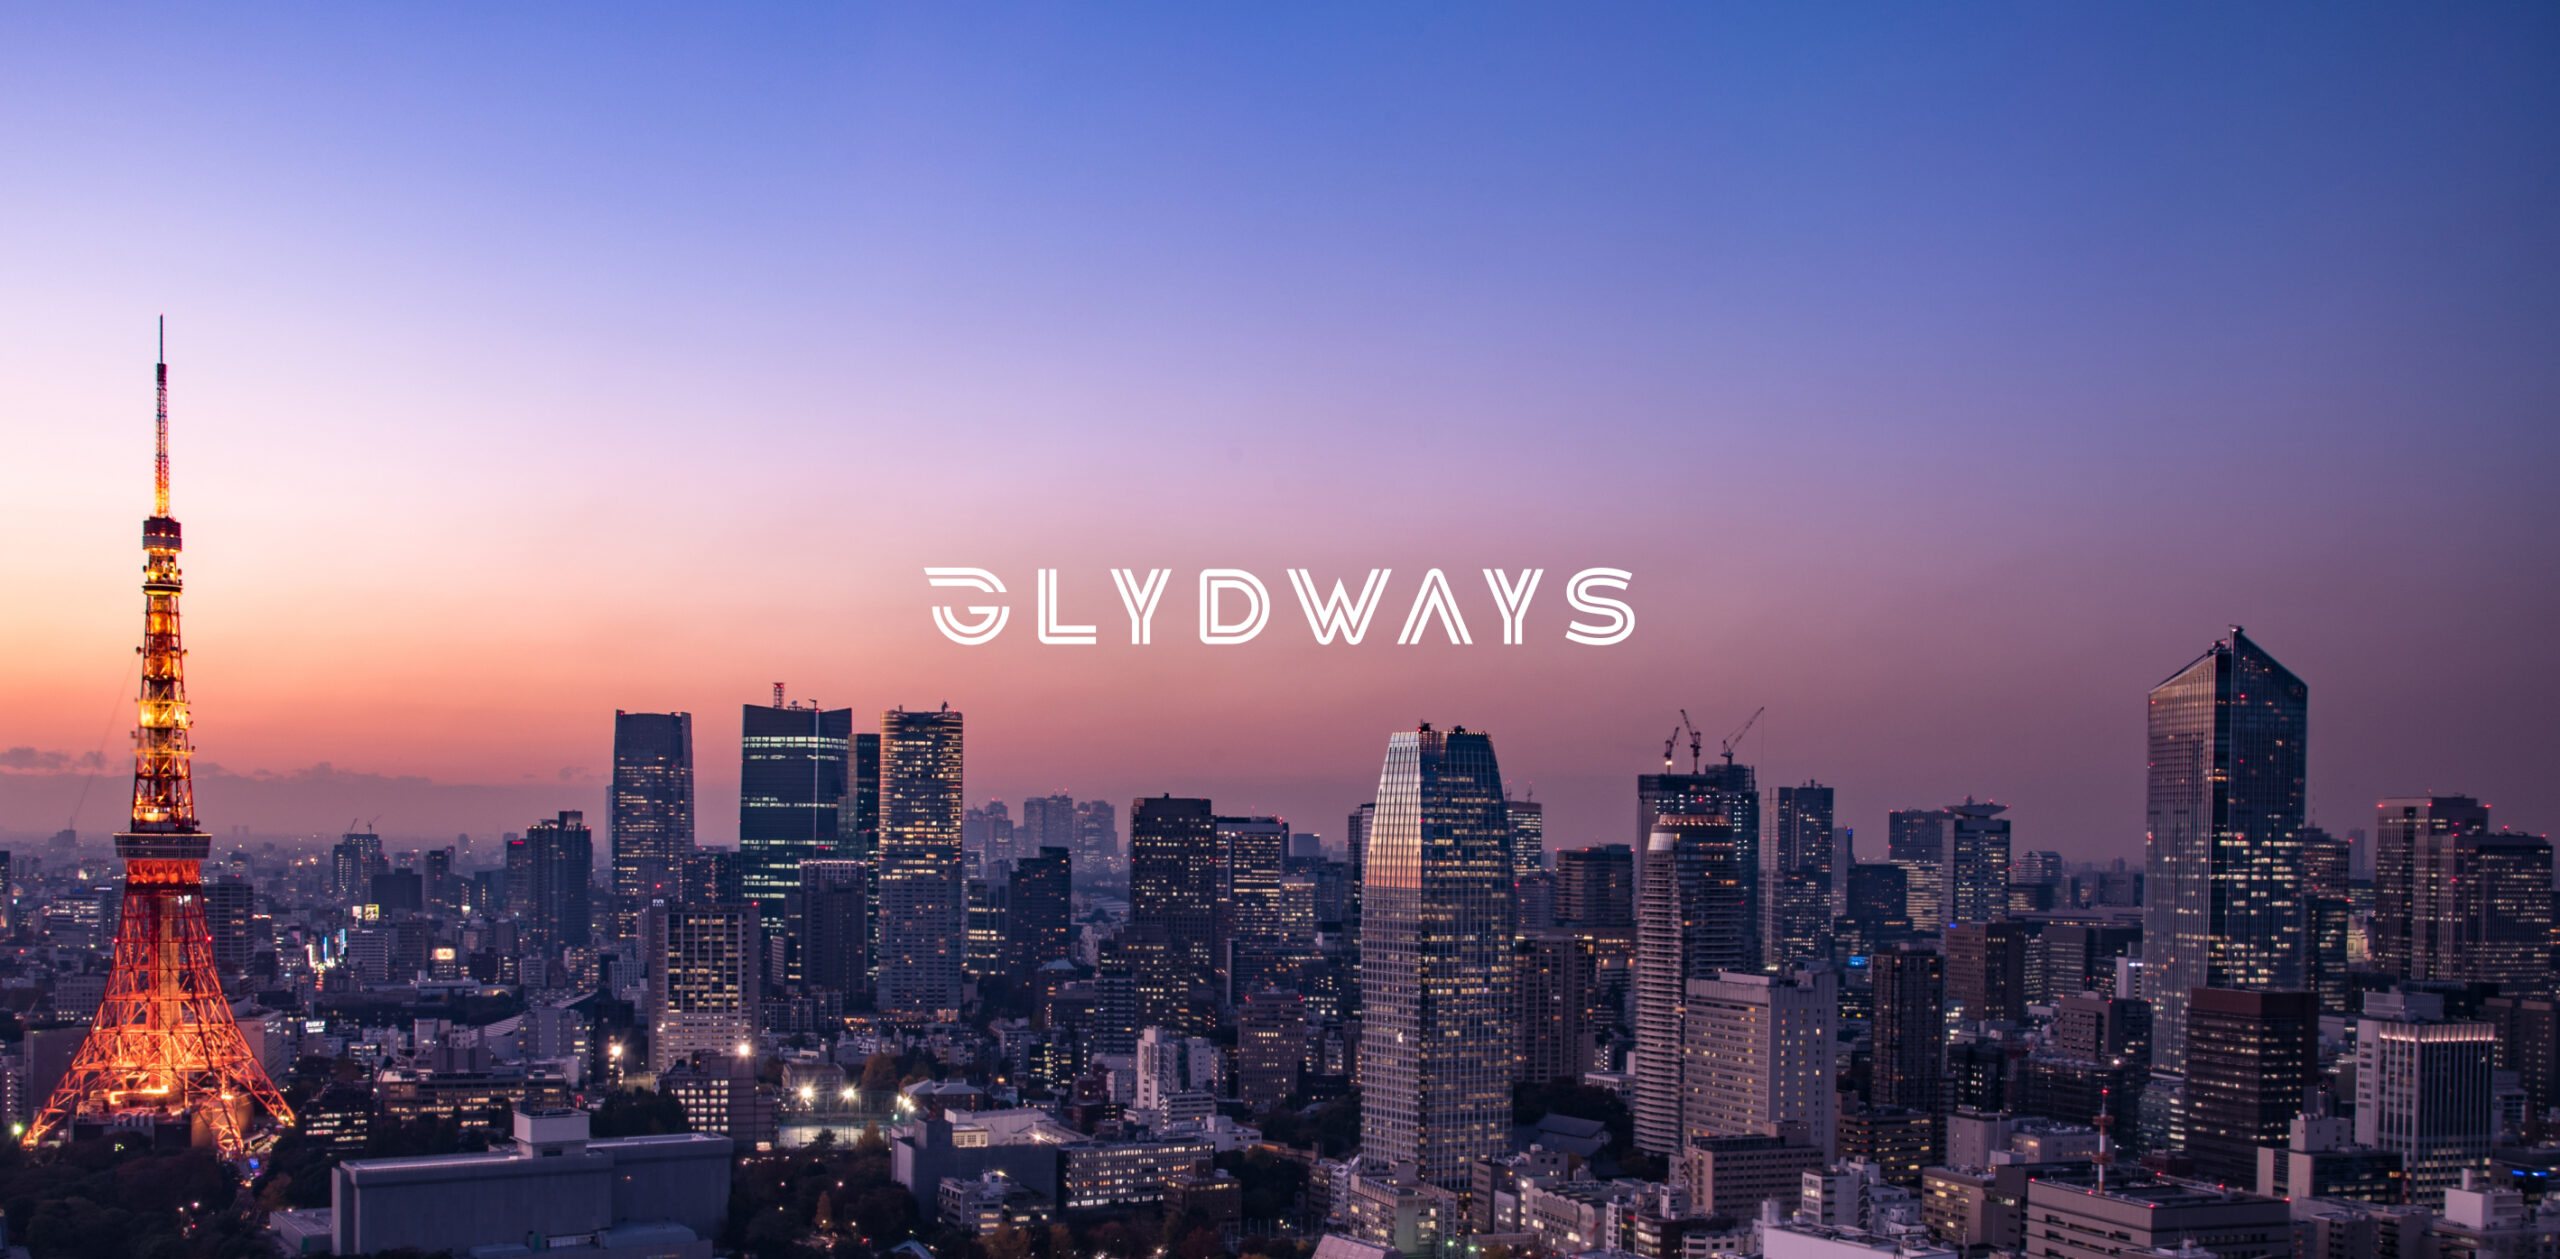 The Special Relationship Between Glydways And Japan